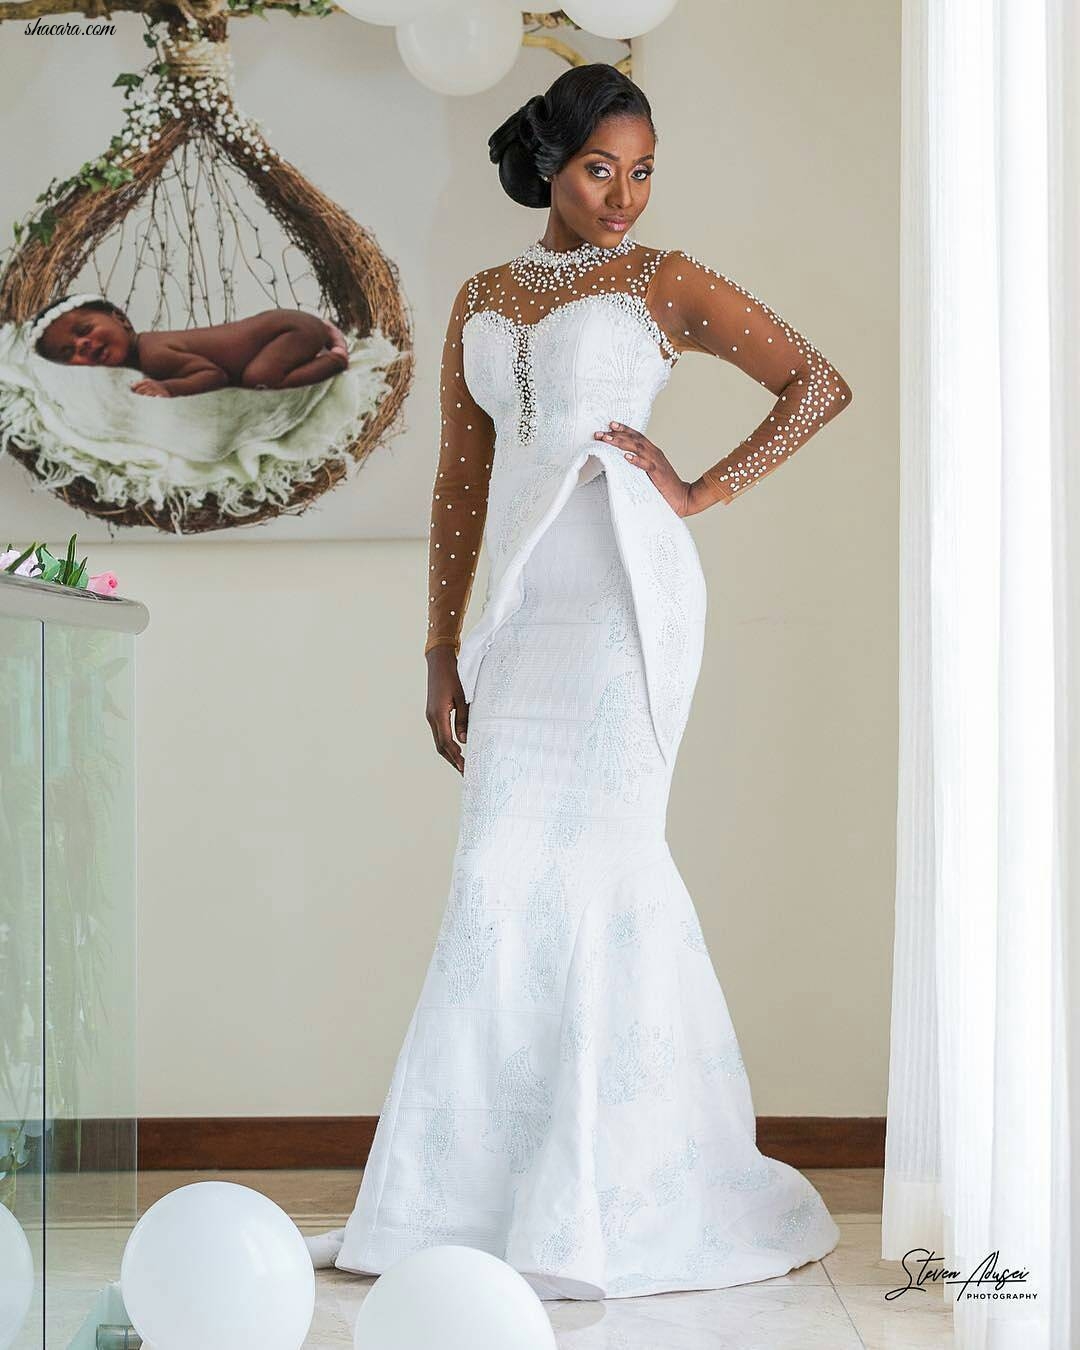 GLAMOUR REDEFINED! STUNNING RECEPTION DRESS INSPIRATION FOR TODAY’S BRIDES